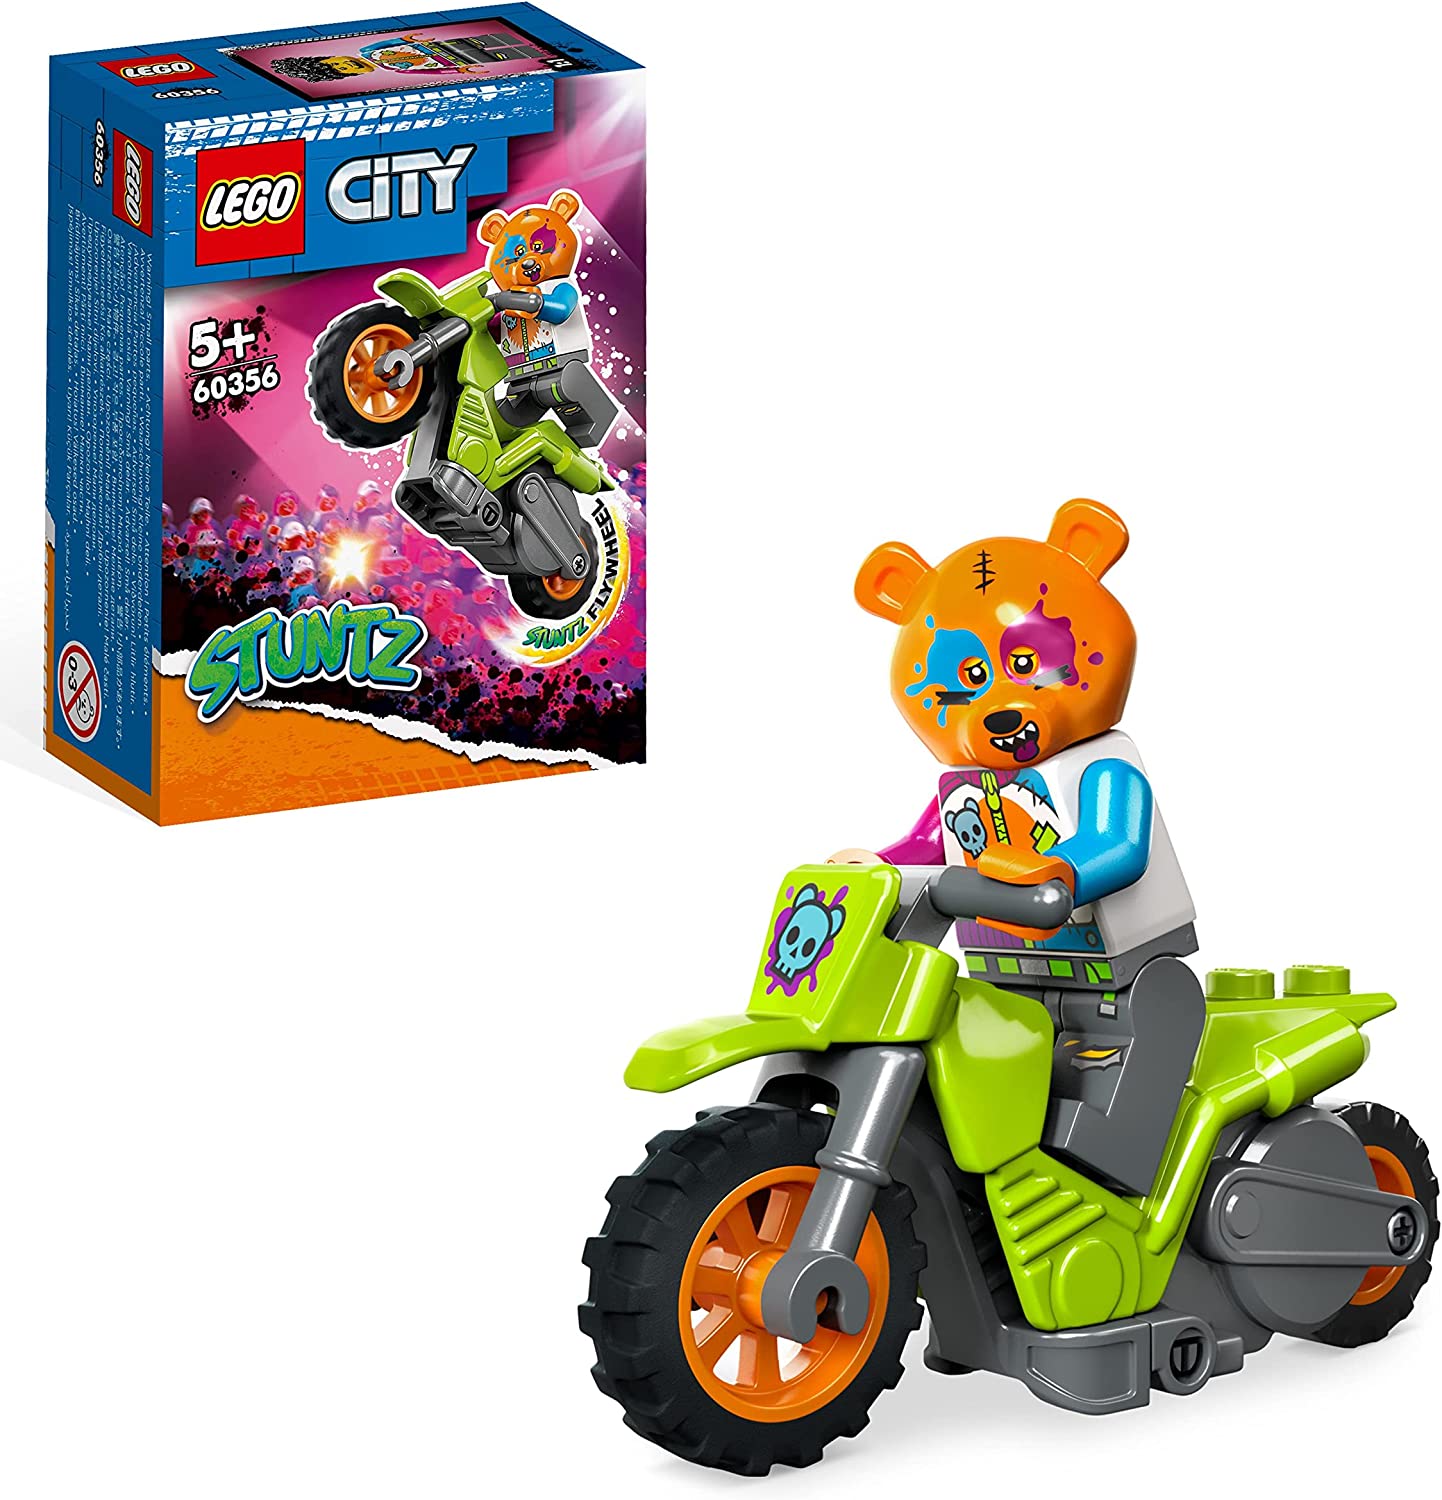 LEGO 60356 City Stuntz Bear Stunt Bike Flywheel Operated Motorcycle Toy with Racer Mini Figure for Exciting Jumps and Tricks as a Small Gift